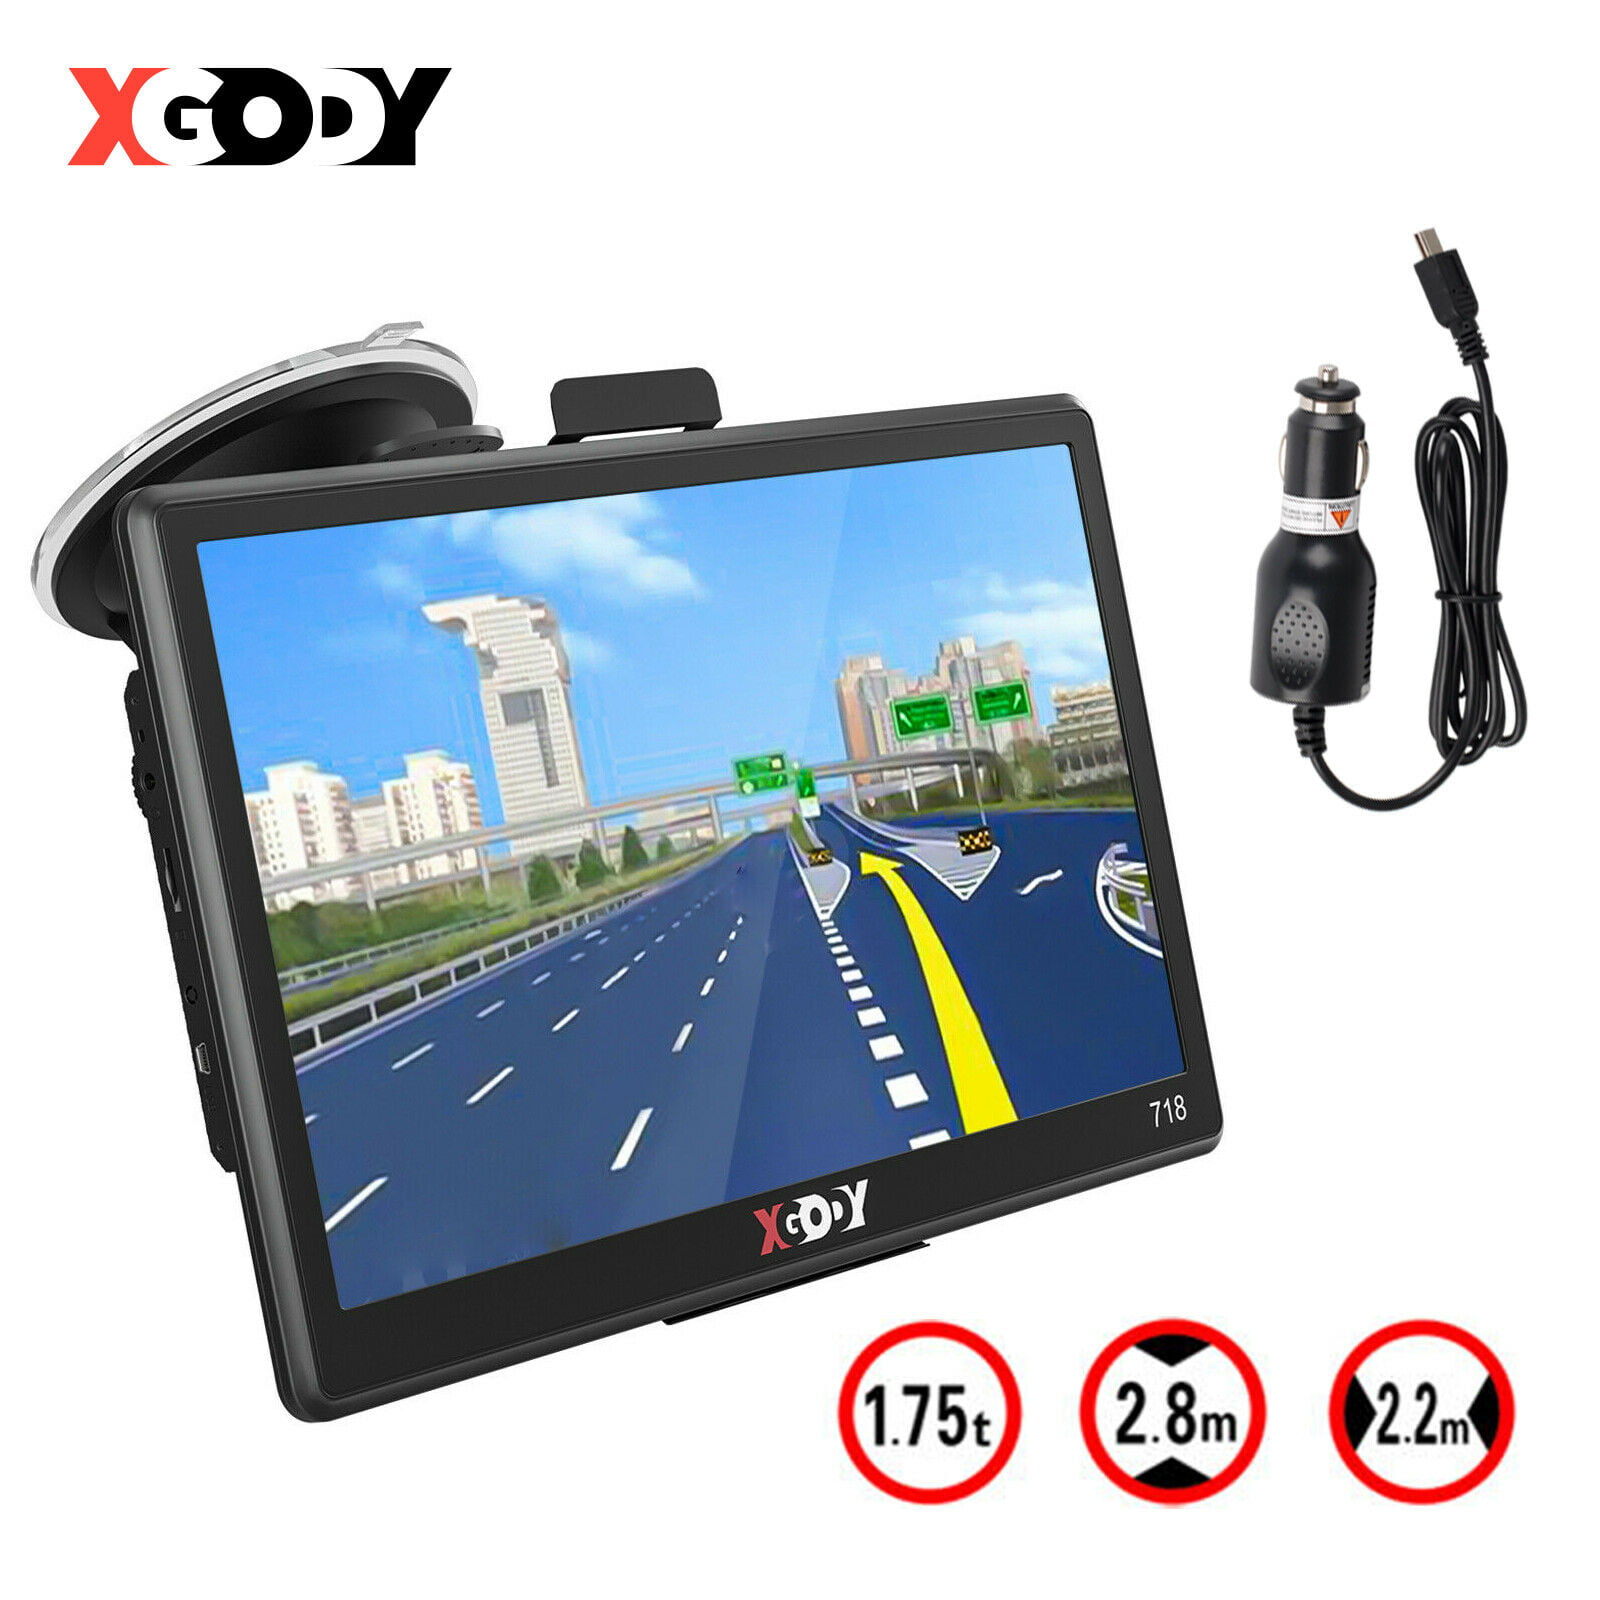 Truck GPS Navigation System Xgody 886 7 Inch Capacitive Touch Screen SAT NAV Navigator for Car with Lifetime US Maps Updated Sunshade Support Speed and Red light Warning